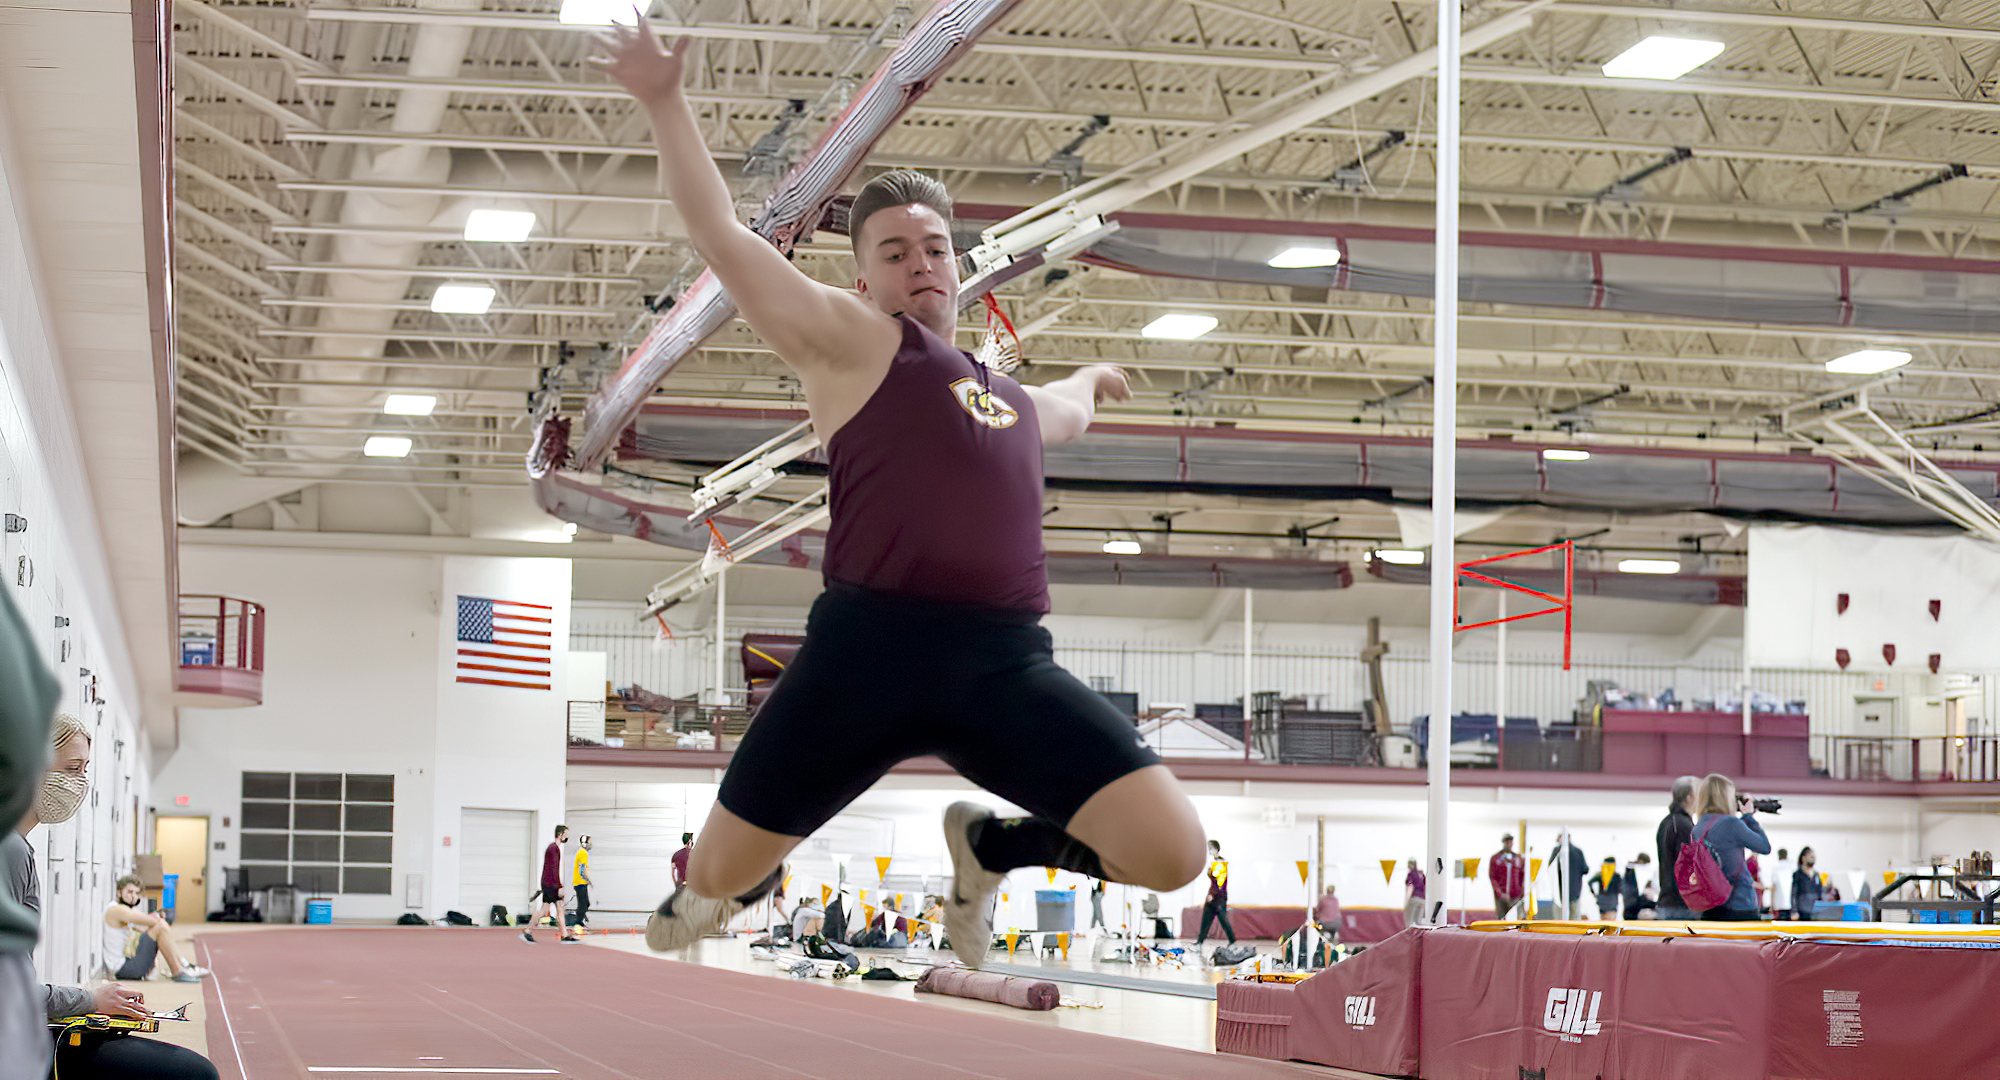 Senior Zach Paustian improved by more than 150 points from his last decathlon at the 2019 MIAC Championship Meet in the 2021 opener at the SJU multi-event meet.